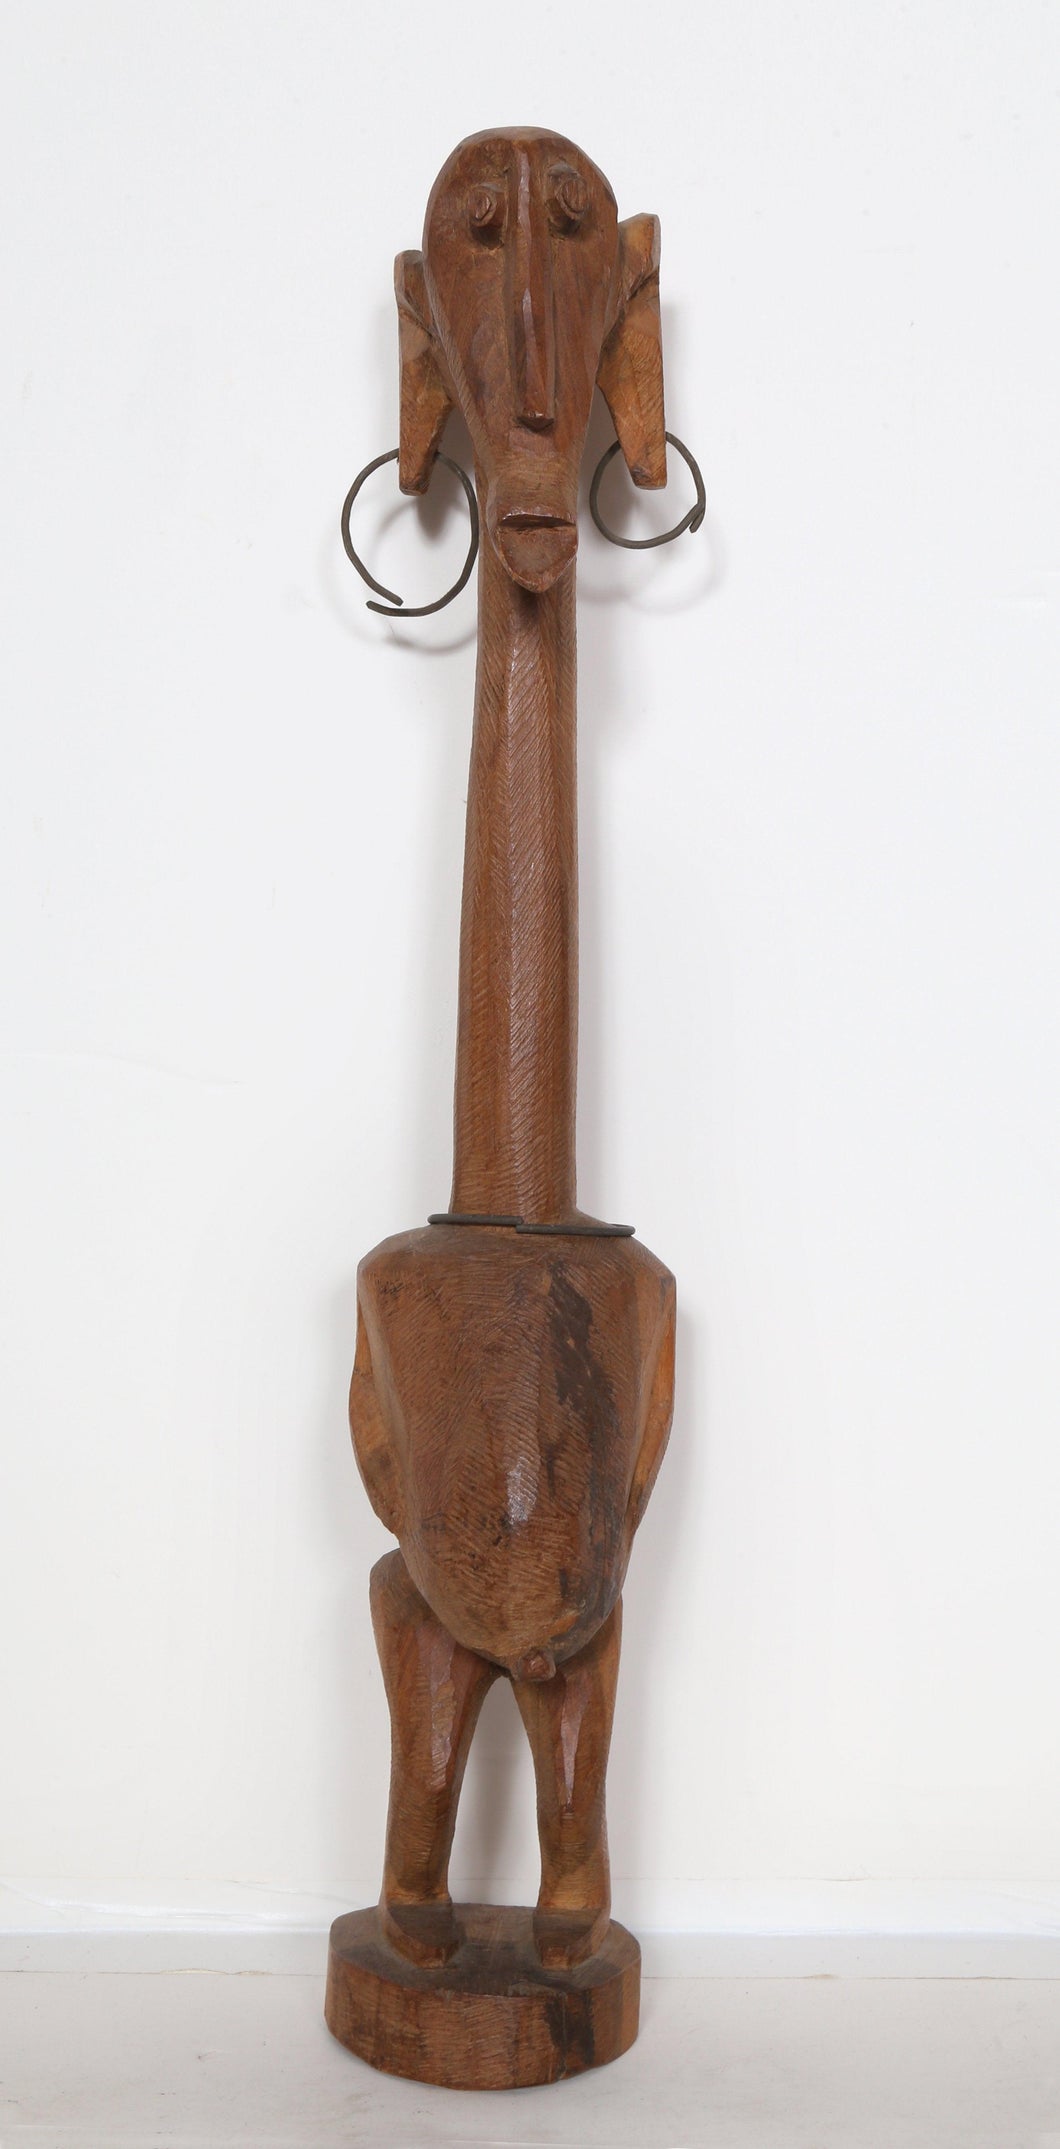 Fertility Figure with Long Neck and Hoop Earrings Wood | African or Oceanic Objects,{{product.type}}